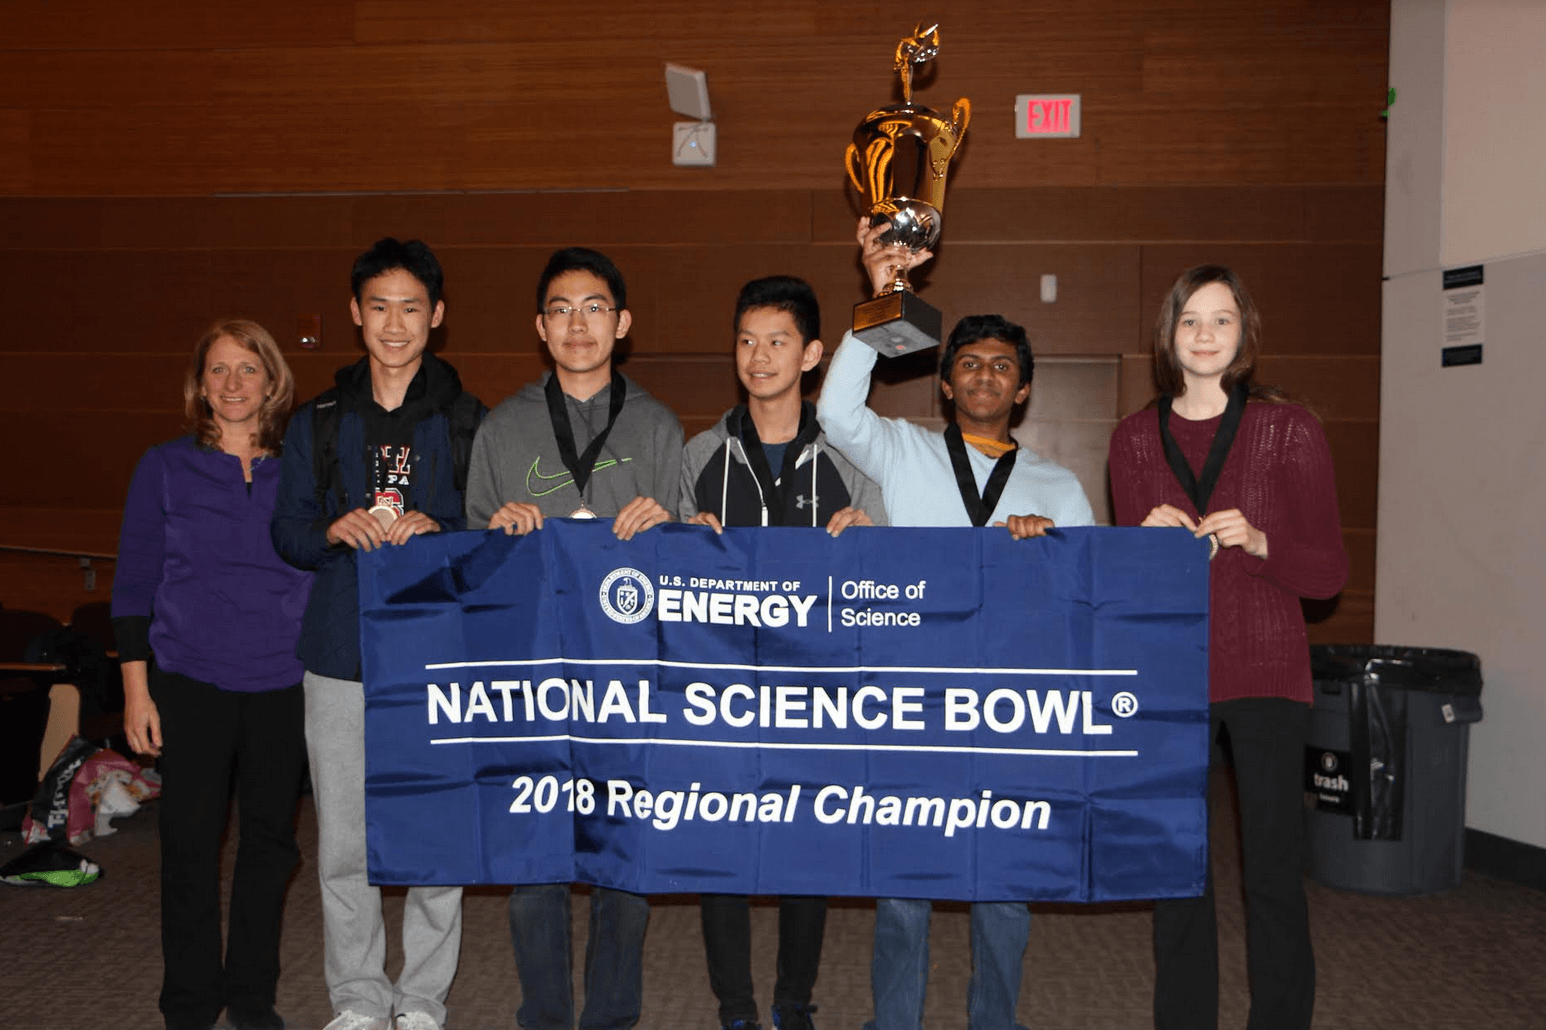 Pictured from left to right: Team Adviser/Coach Maria Buono, Nicholas Liu, Henry Shi, Derrick Xiong, Rahul Subramaniam, and Phoebe Hartch